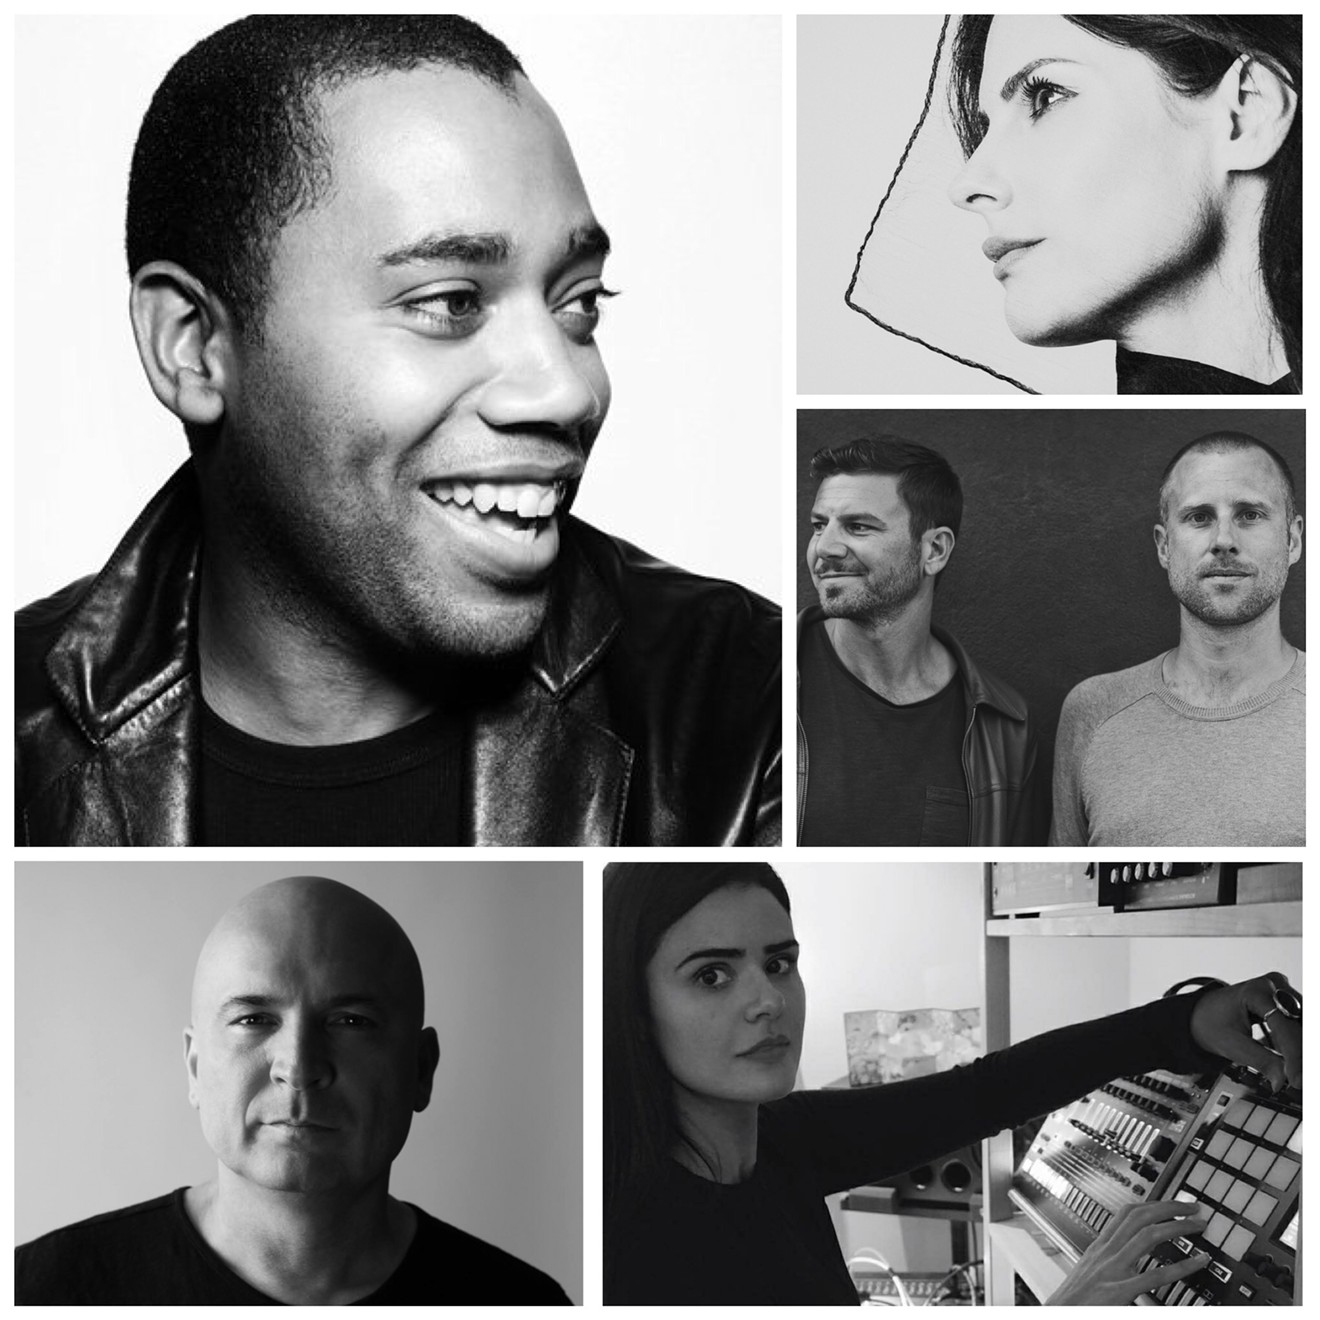 Clockwise from top left: Carl Craig, Sept. 8; Rebekah, Feb. 23; Audiojack, May 19; Anna, March 3; and  Stefano Noferini, March 30.